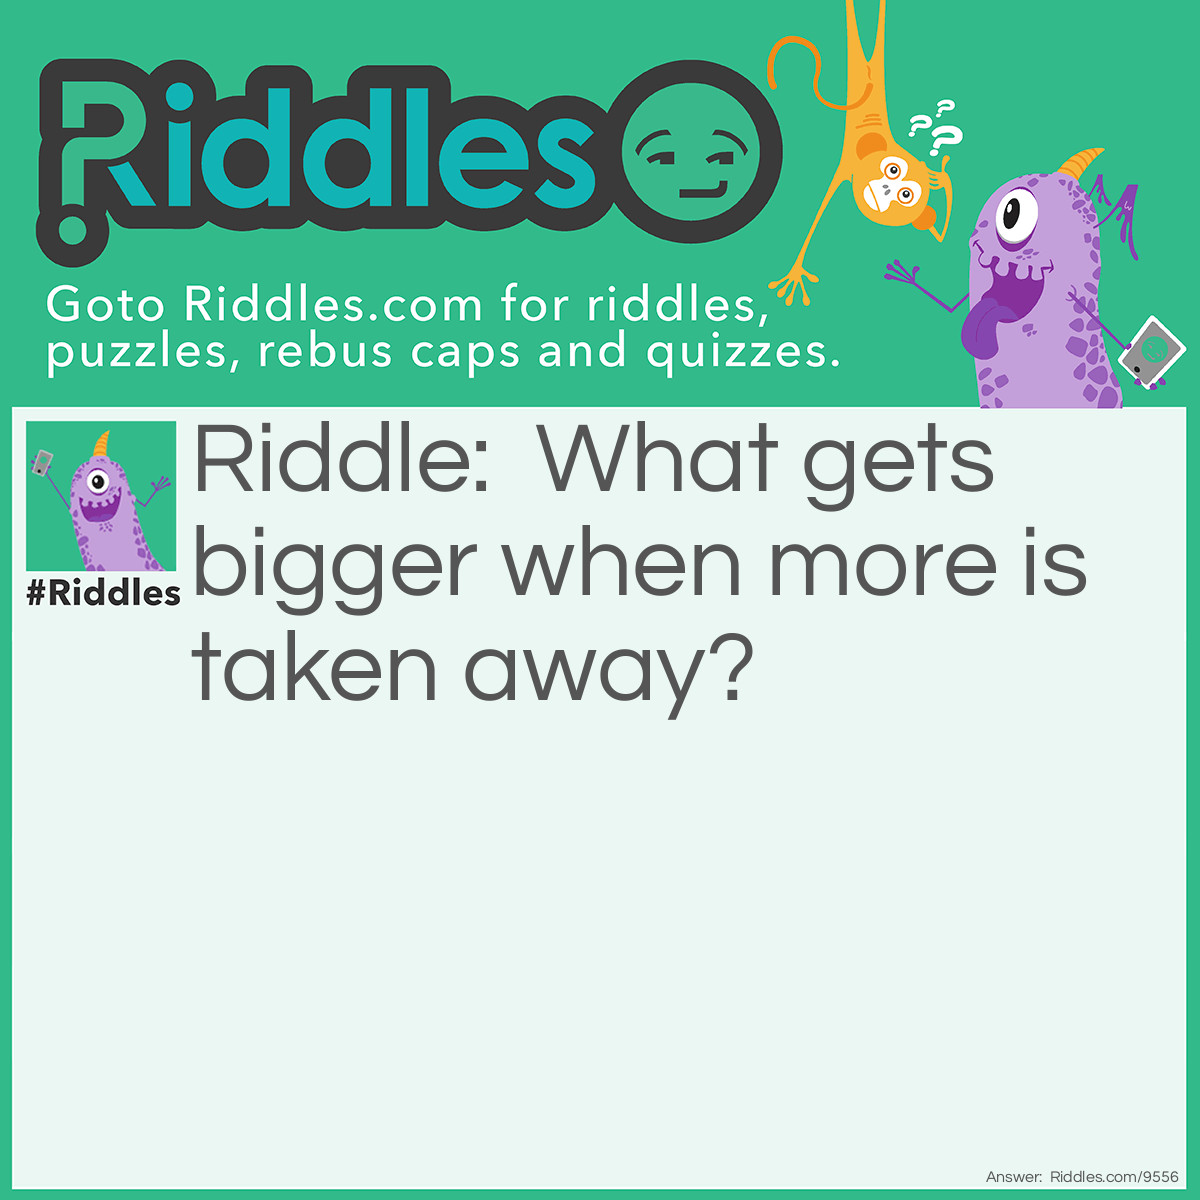 Riddle: What gets bigger when more is taken away? Answer: A hole.